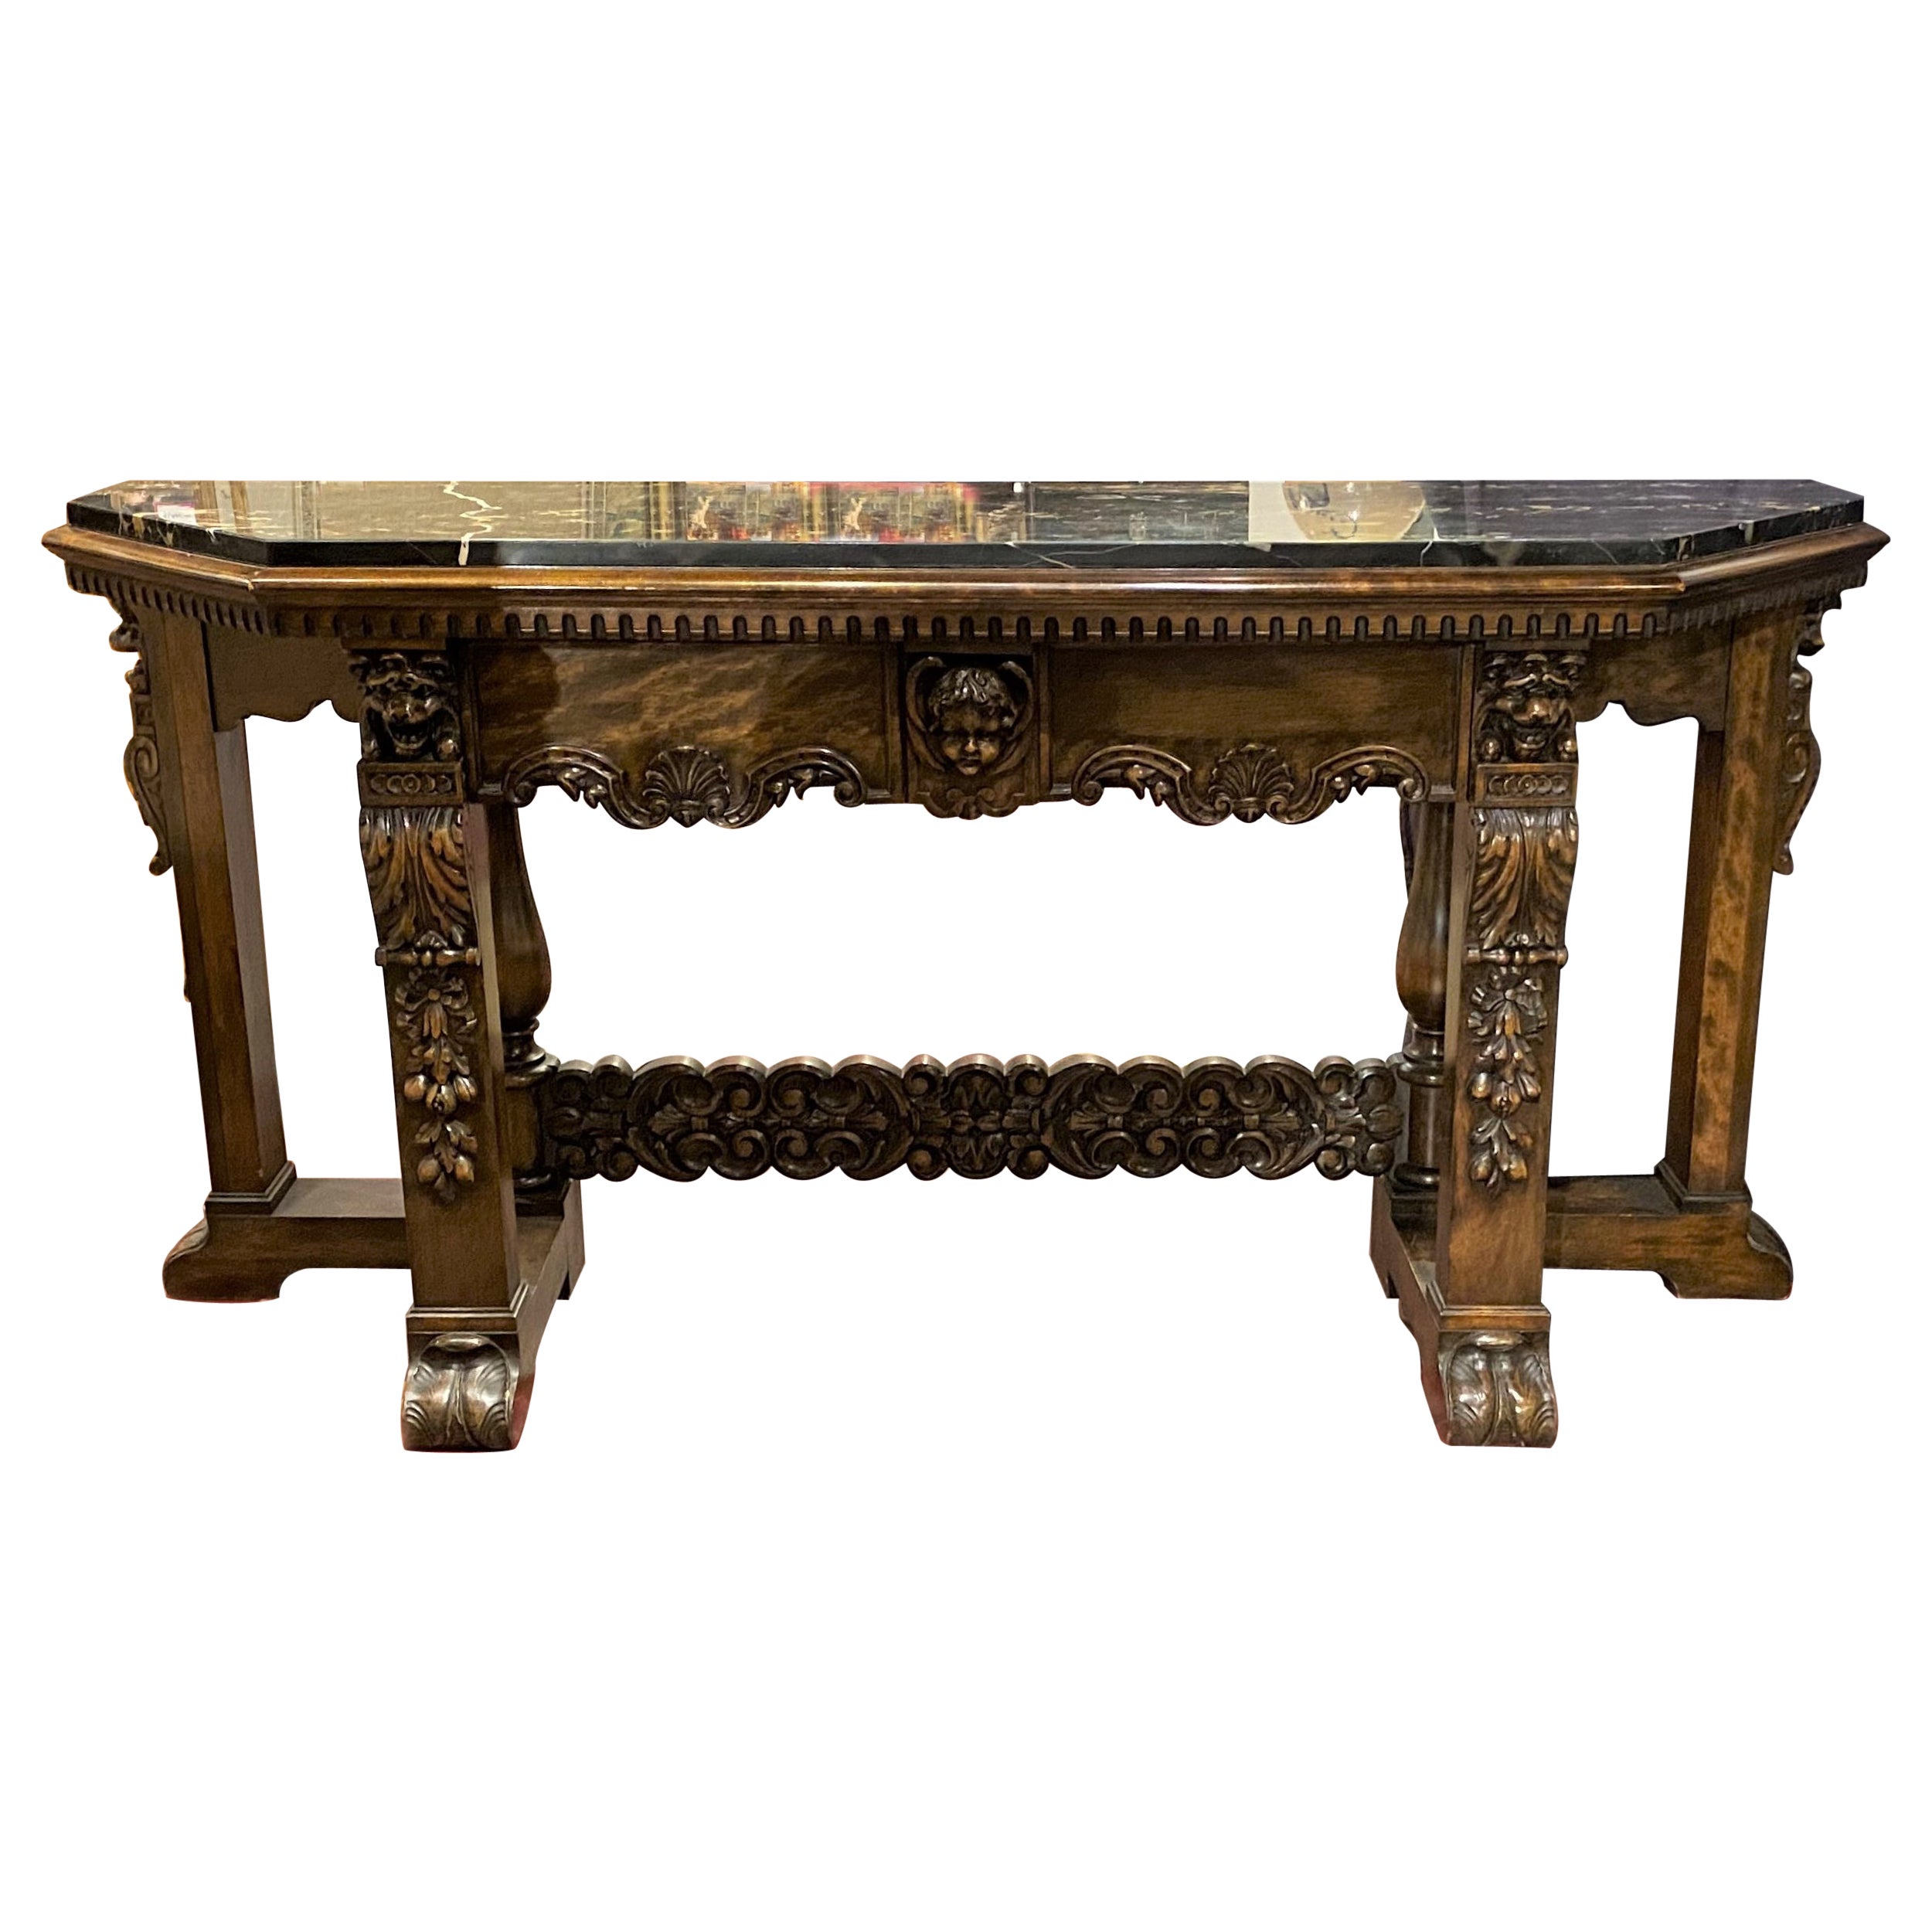 Mahogany Baroque Revival Marble Top Console Table with Lion & Acanthus Carving For Sale